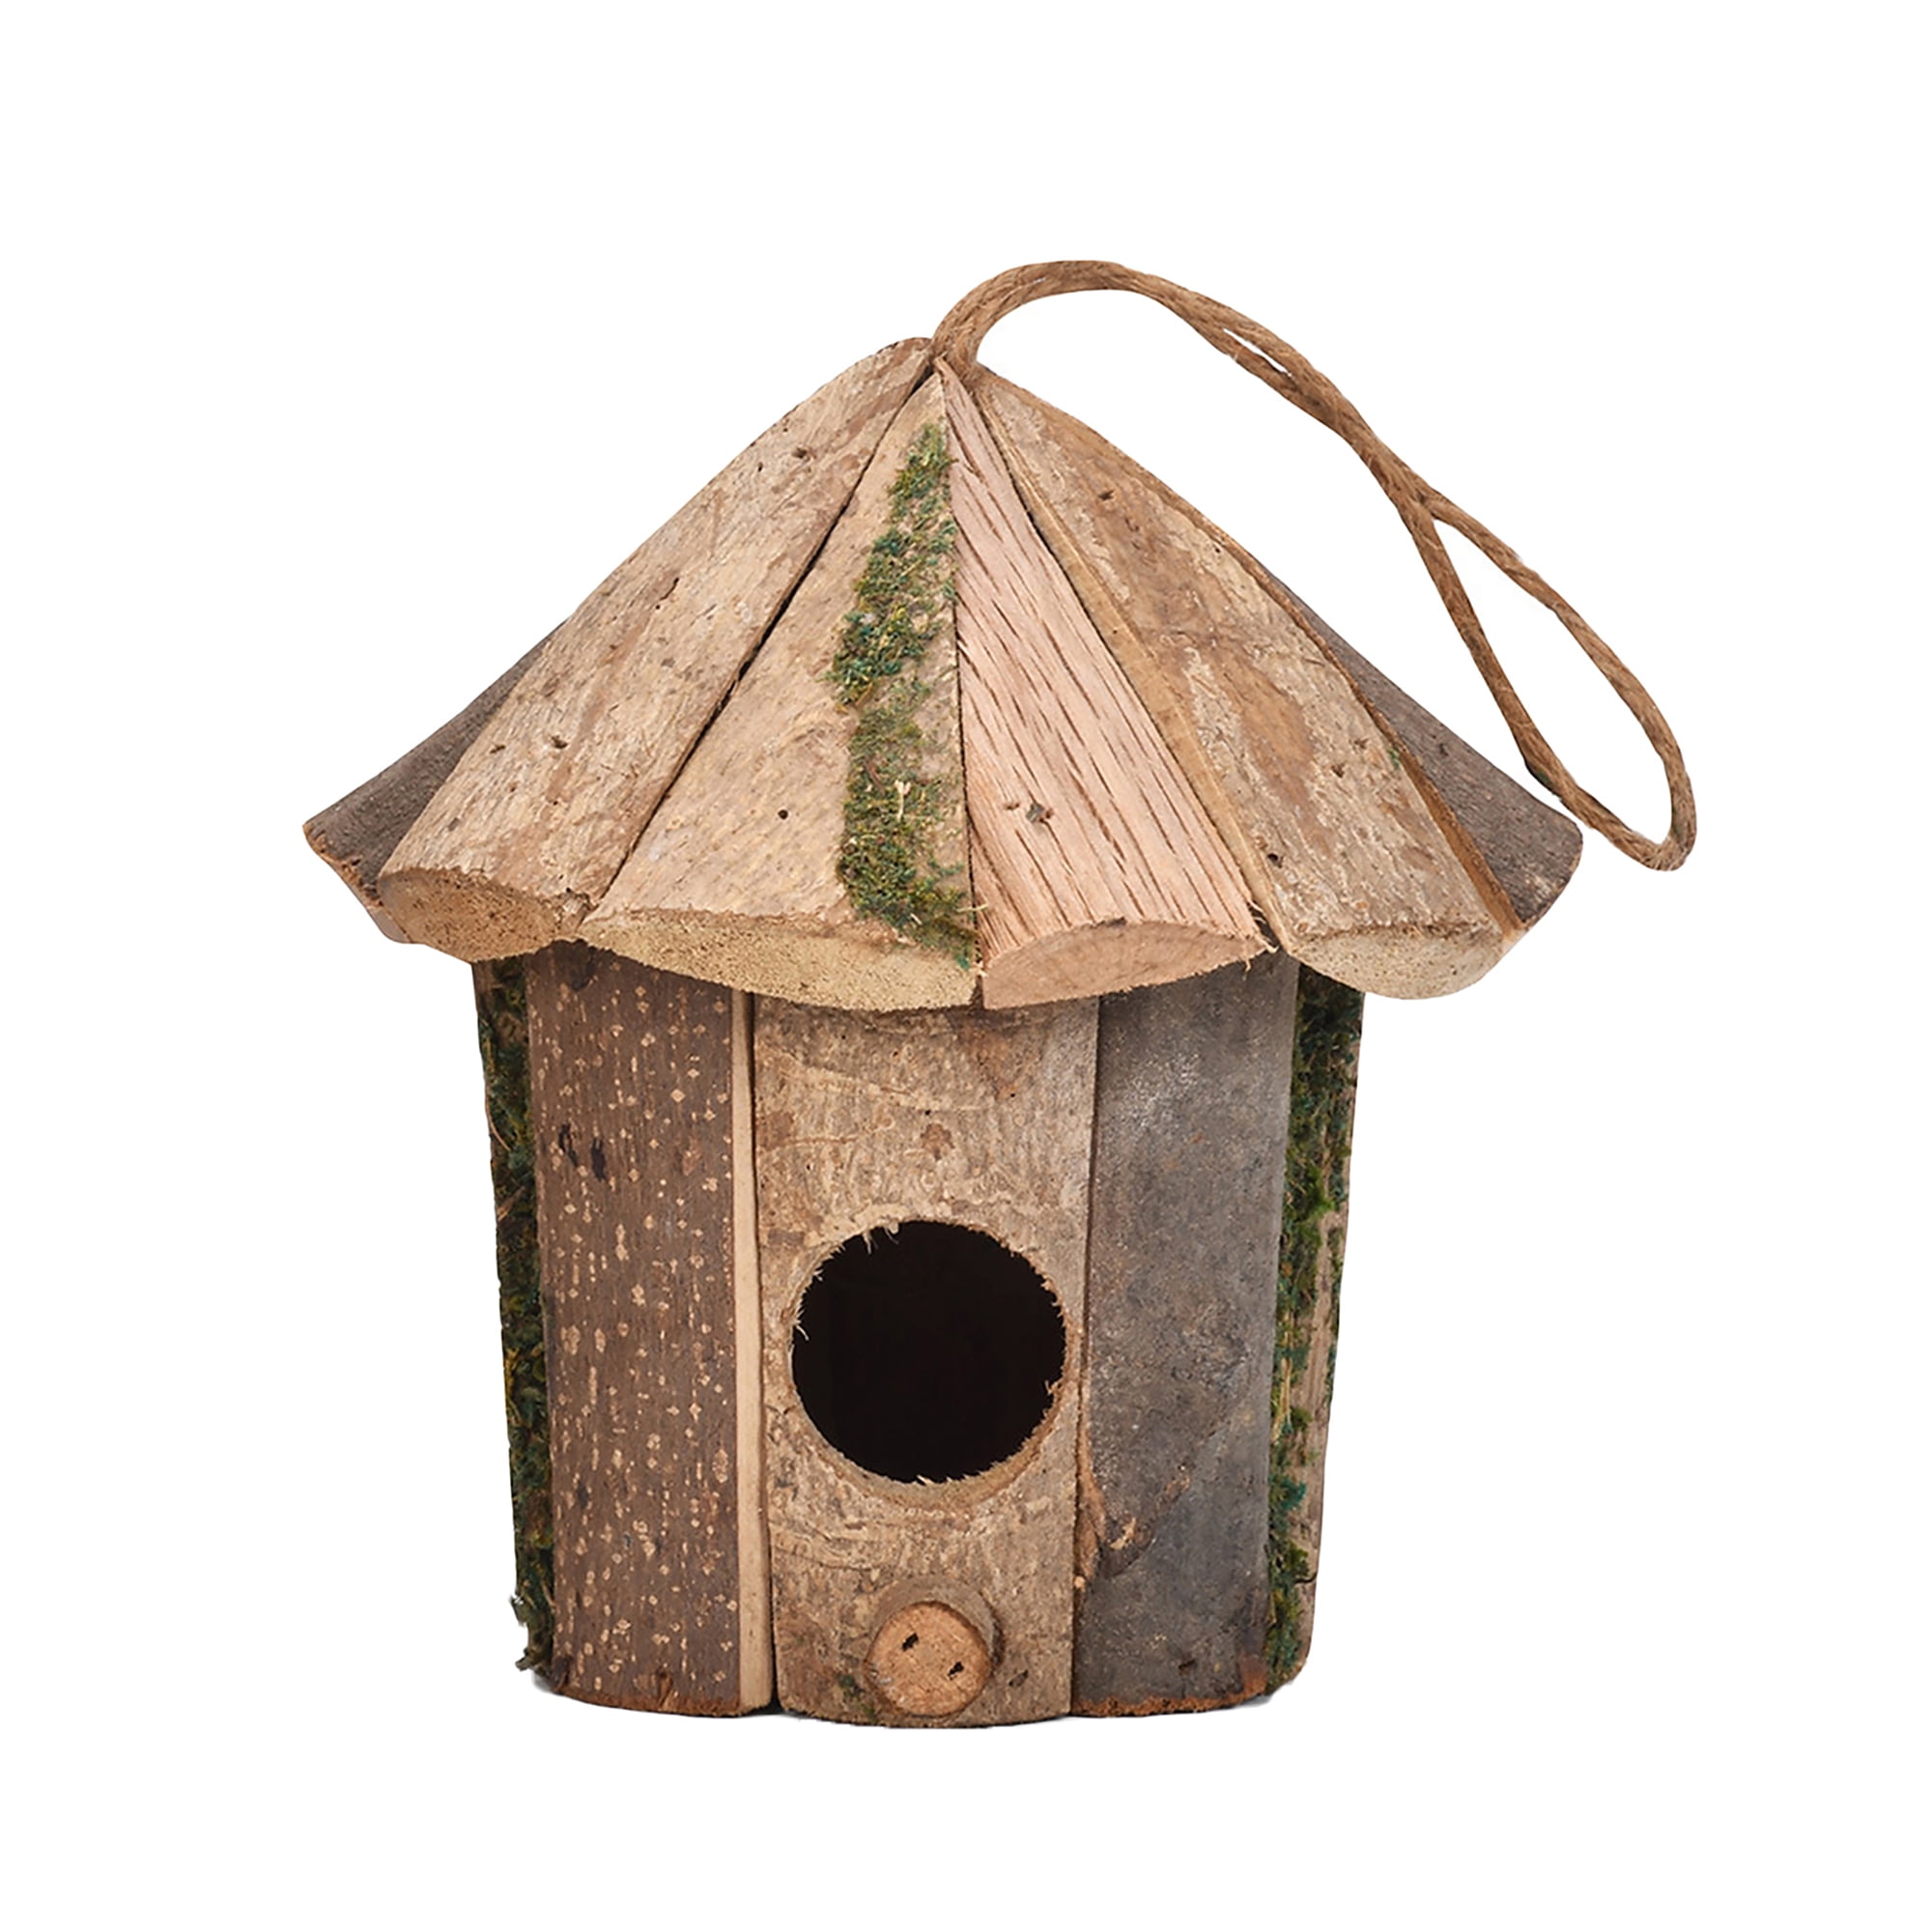 show original title Details about   Birdhouse L feeding ground bird shelter Hexagon Wooden with Stand Brown/Green 